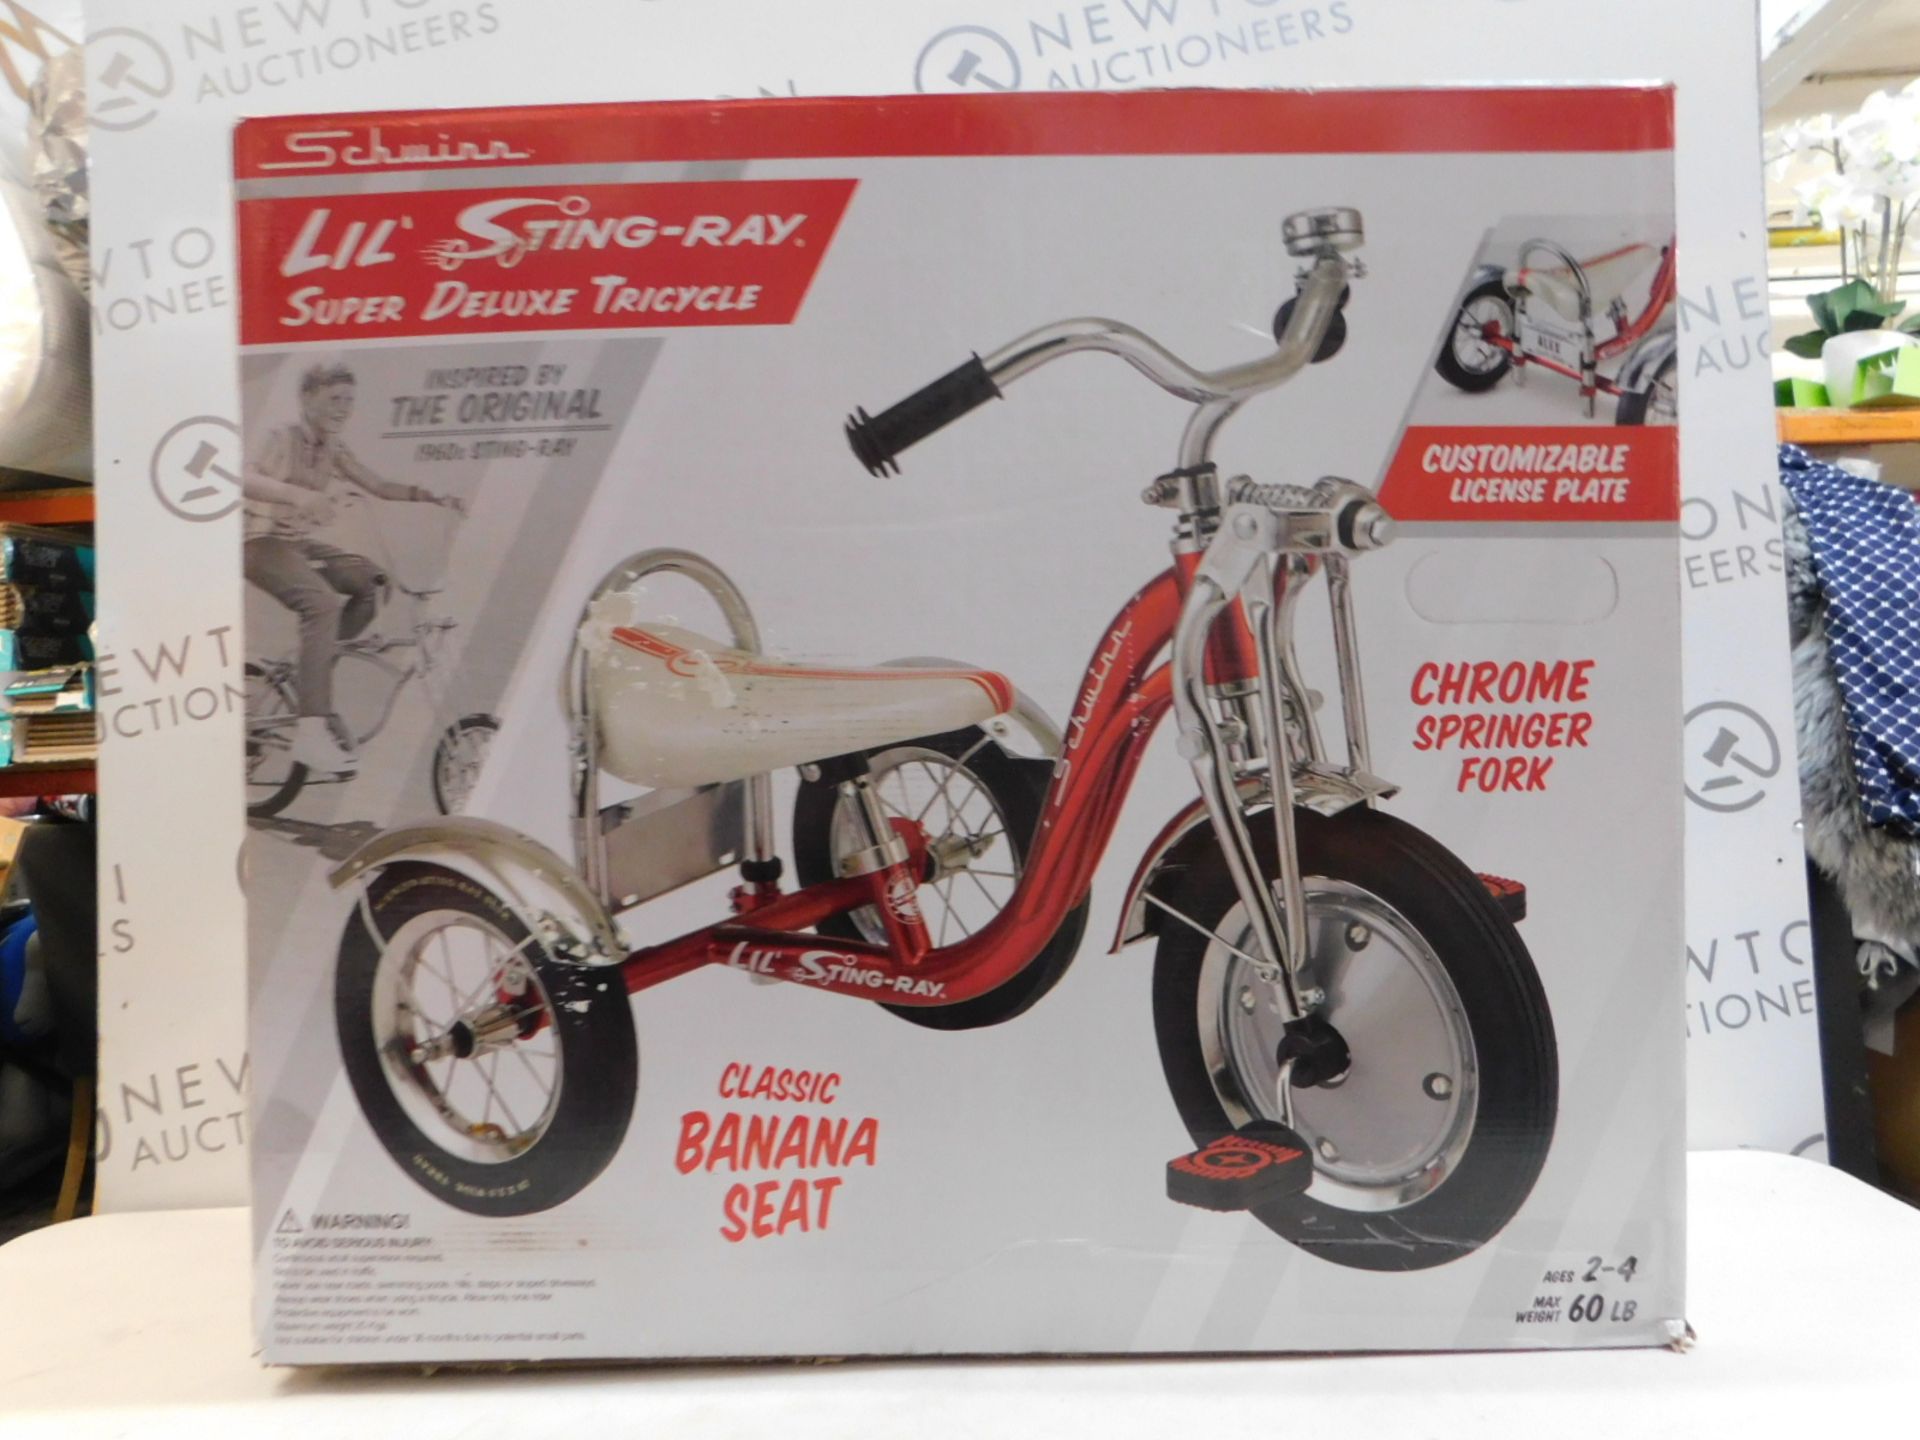 1 BOXED SCHWINN LIL STING-RAY SUPER DELUXE TRICYCLE RRP Â£119.99